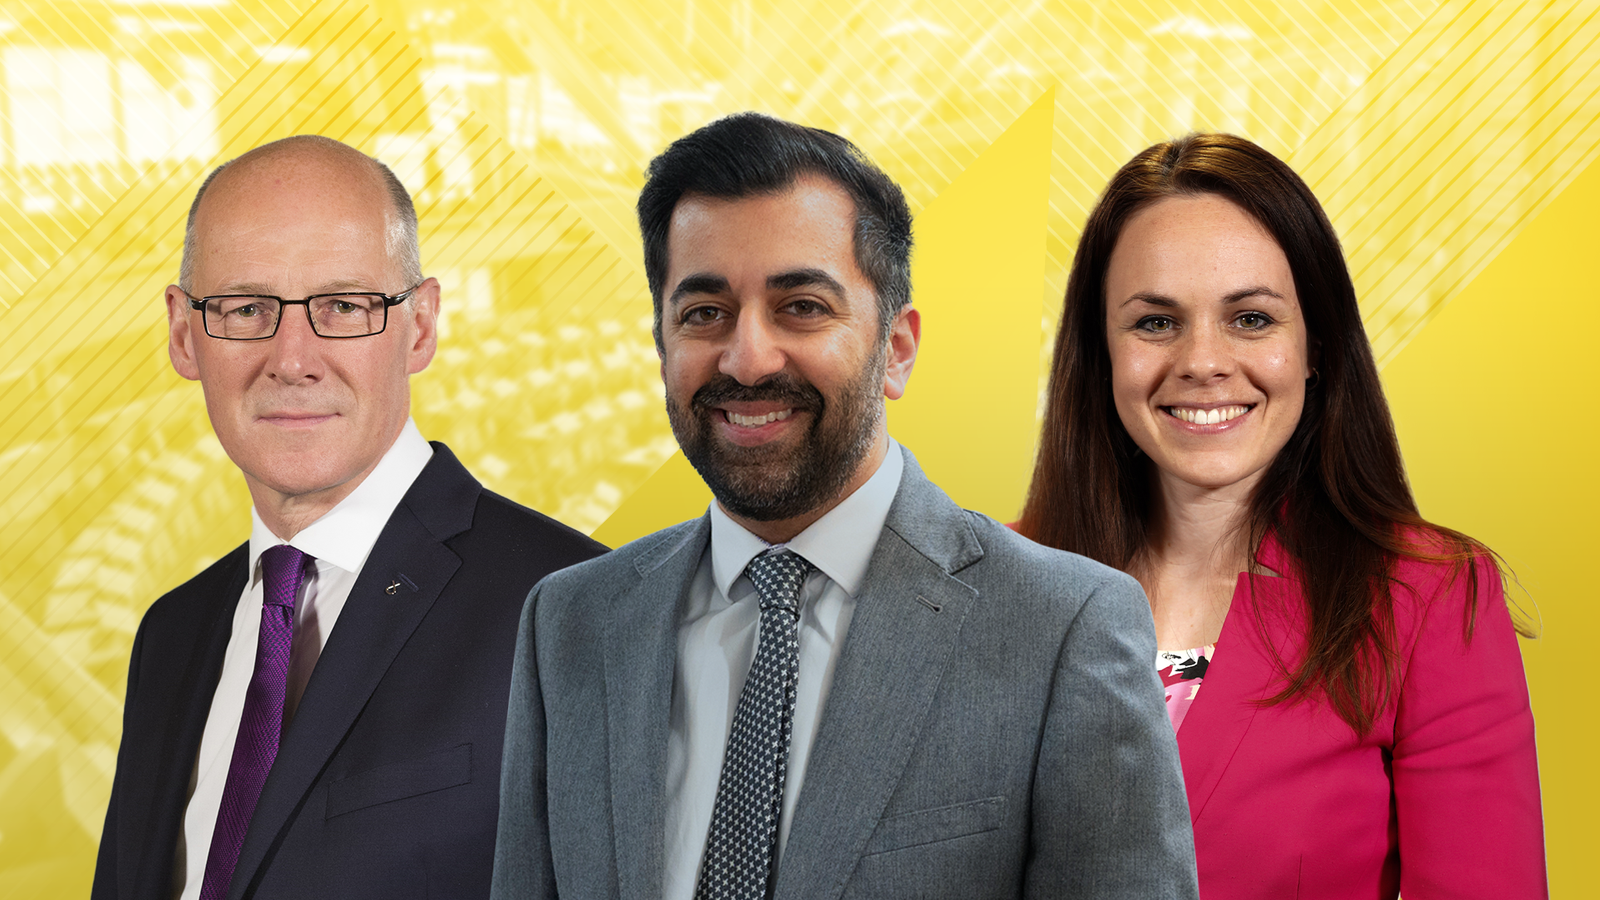 Who could replace Humza Yousaf as Scotland's first